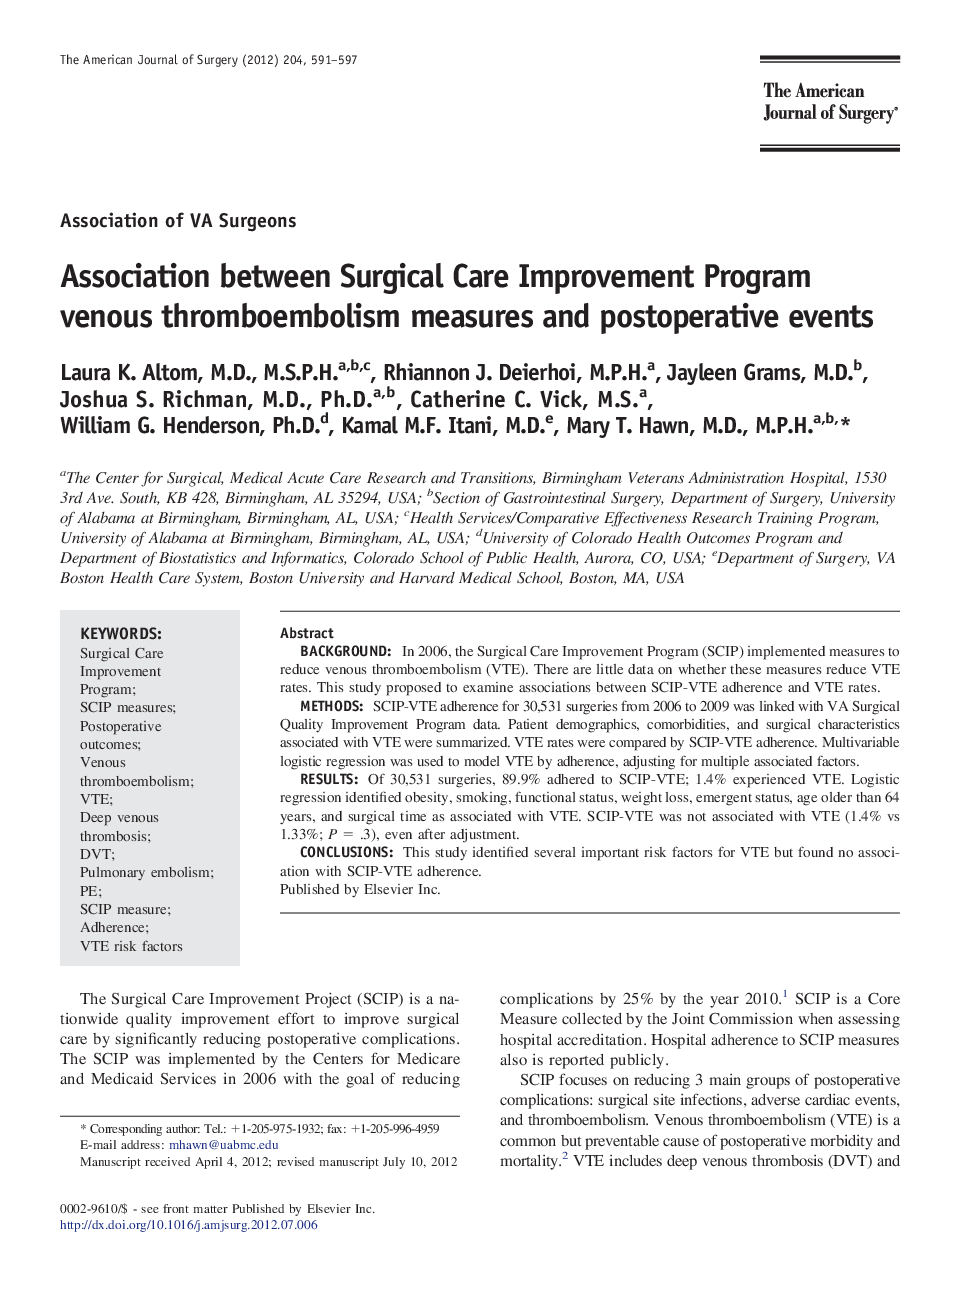 Association between Surgical Care Improvement Program venous thromboembolism measures and postoperative events